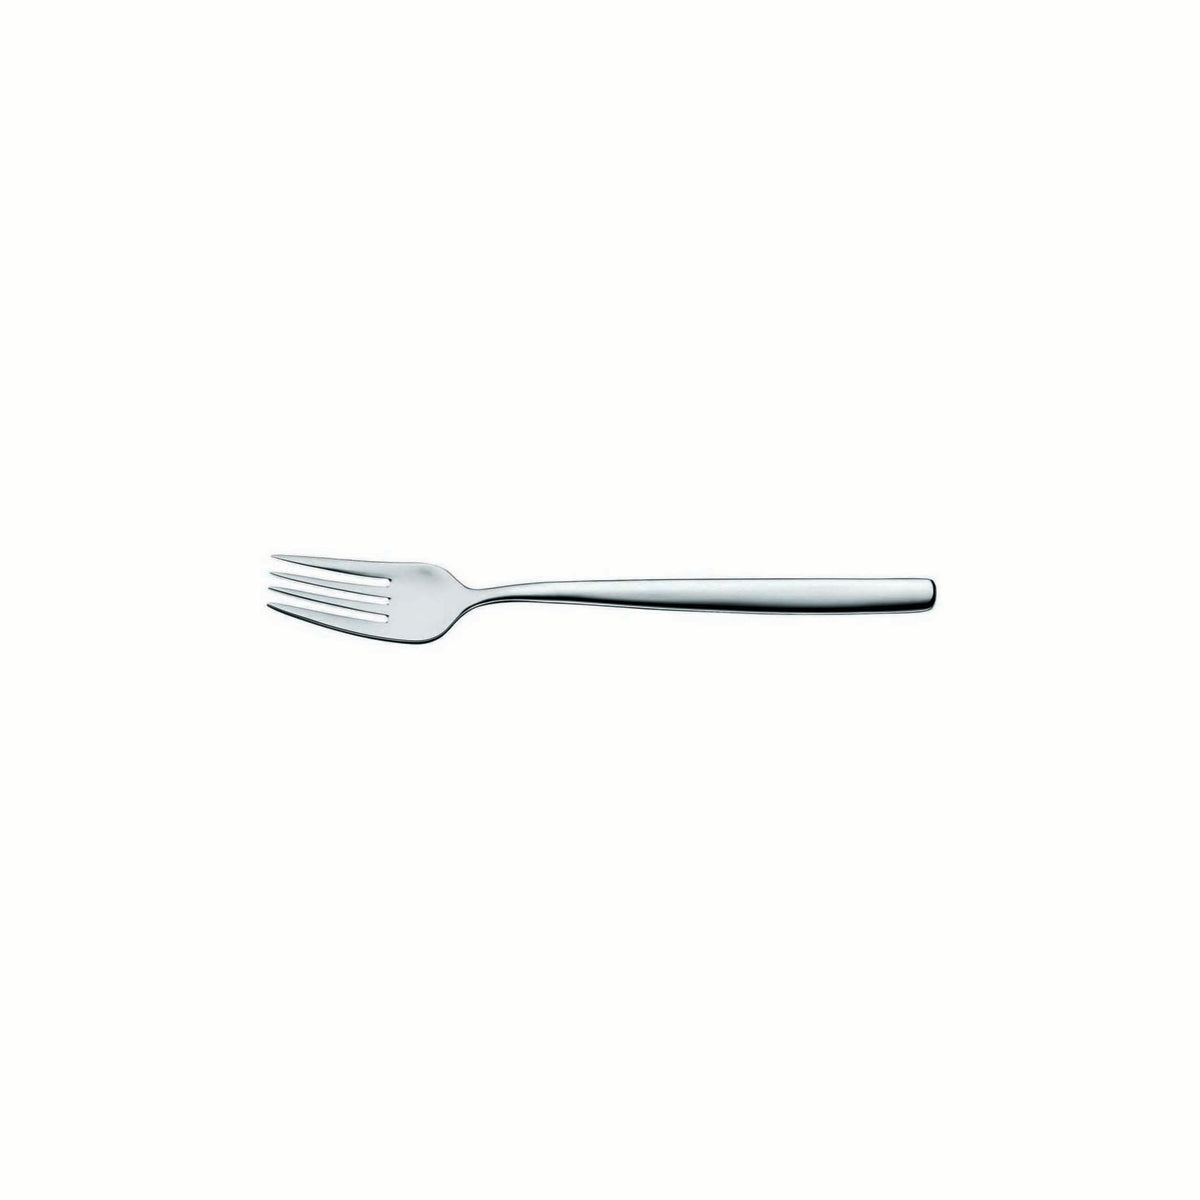 01.0402.6060 WMF Bistro Table Fork Silverplated Tomkin Australia Hospitality Supplies